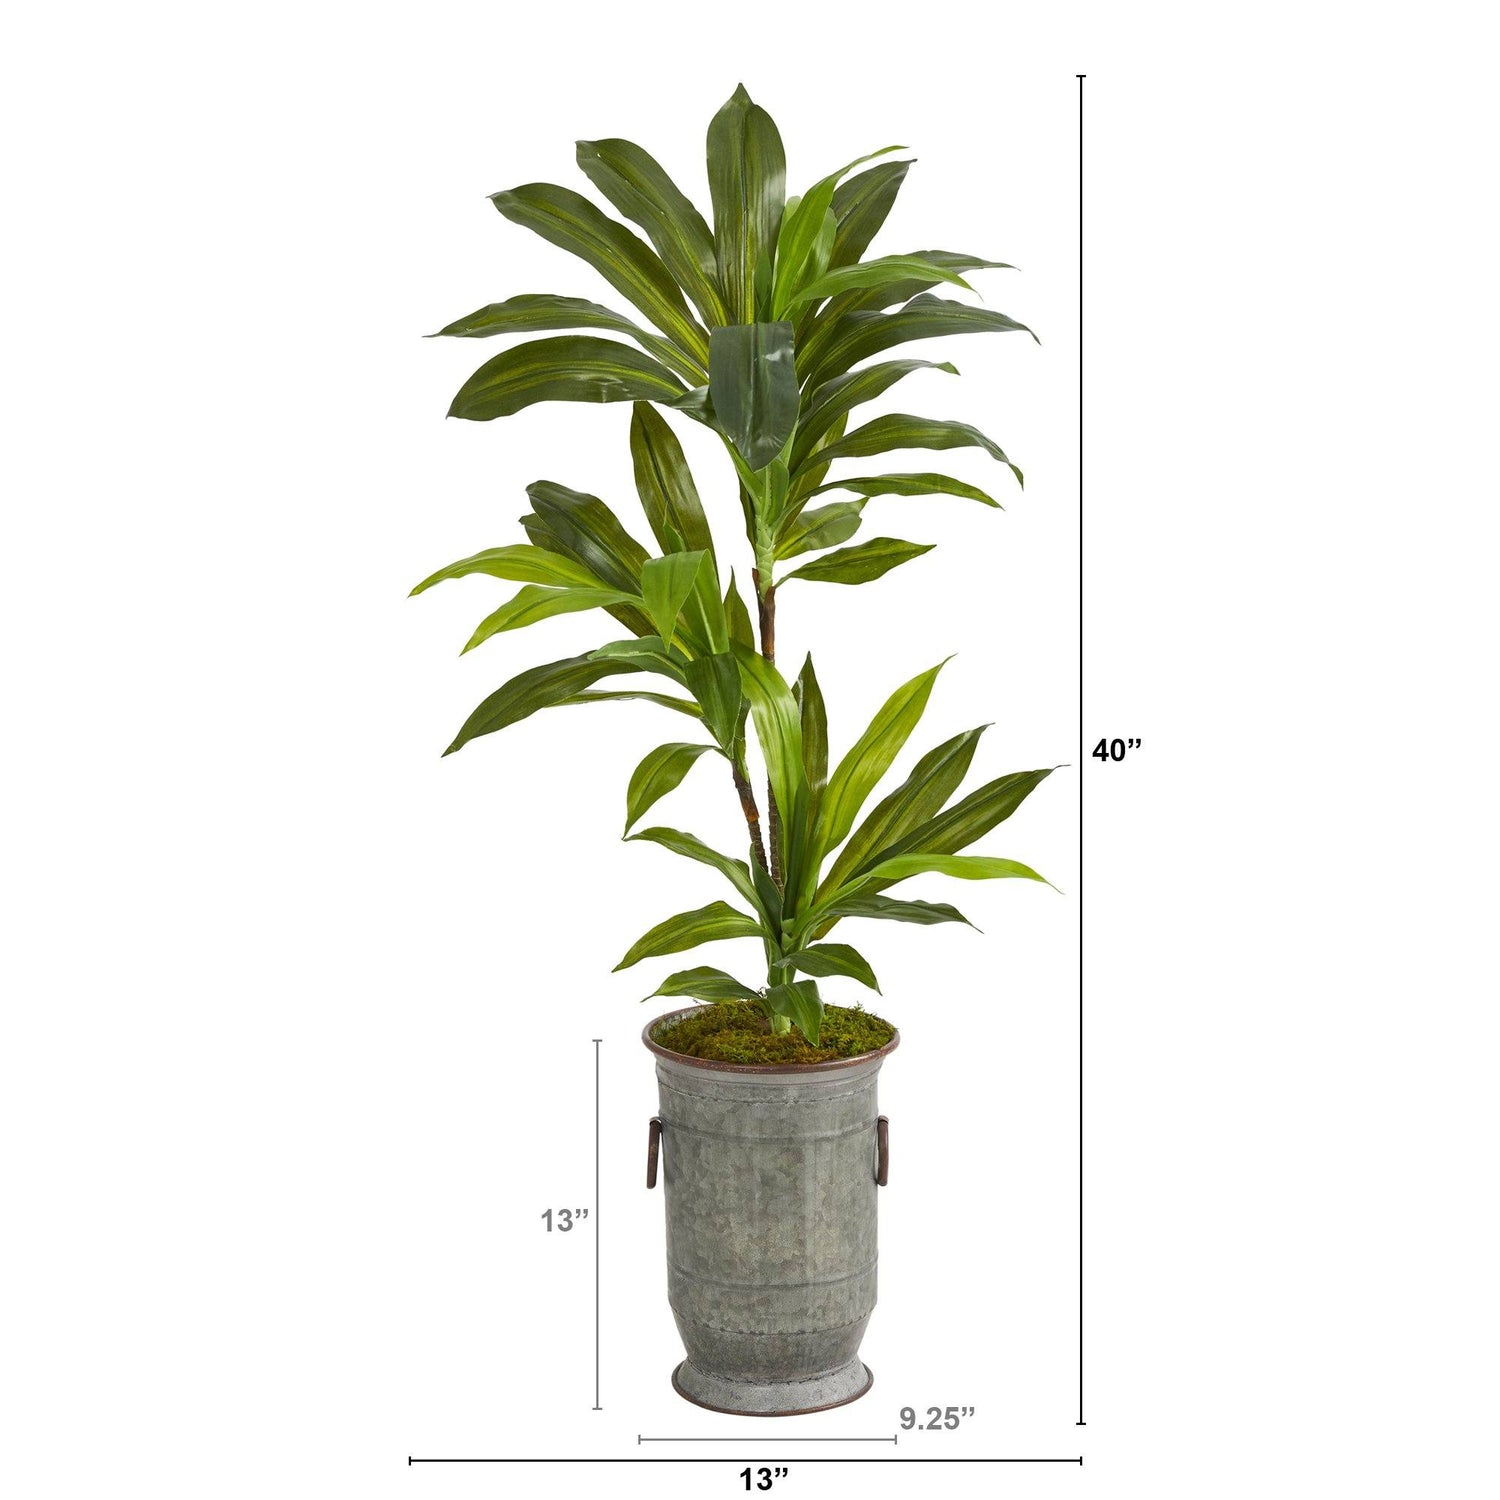 40” Dracaena Artificial Plant in Vintage Metal Planter (Real Touch)